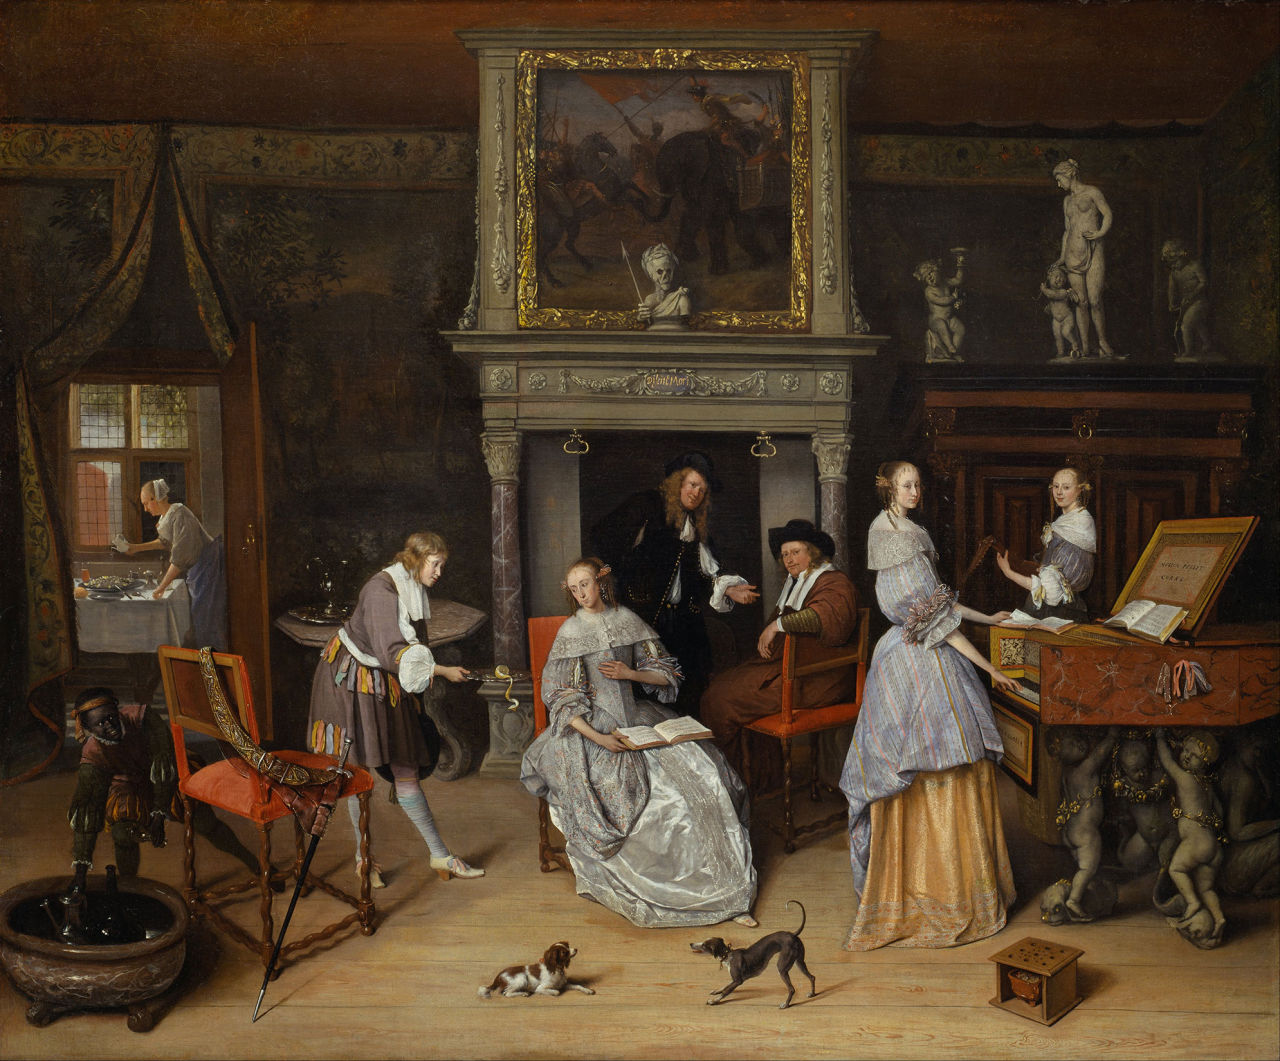 Jan Steen, Dutch (1626-1679). "Fantasy Interior with Jan Steen and the Family of Gerrit Schouten," ca. 1659-1660. Oil on canvas, 33 3/8 x 39 13/16 inches. The Nelson-Atkins Museum of Art, Kansas City, Missouri. Purchase: William Rockhill Nelson Trust, 67-8. (Courtesy of The Nelson-Atkins Museum of Art, Kansas City, Missouri)